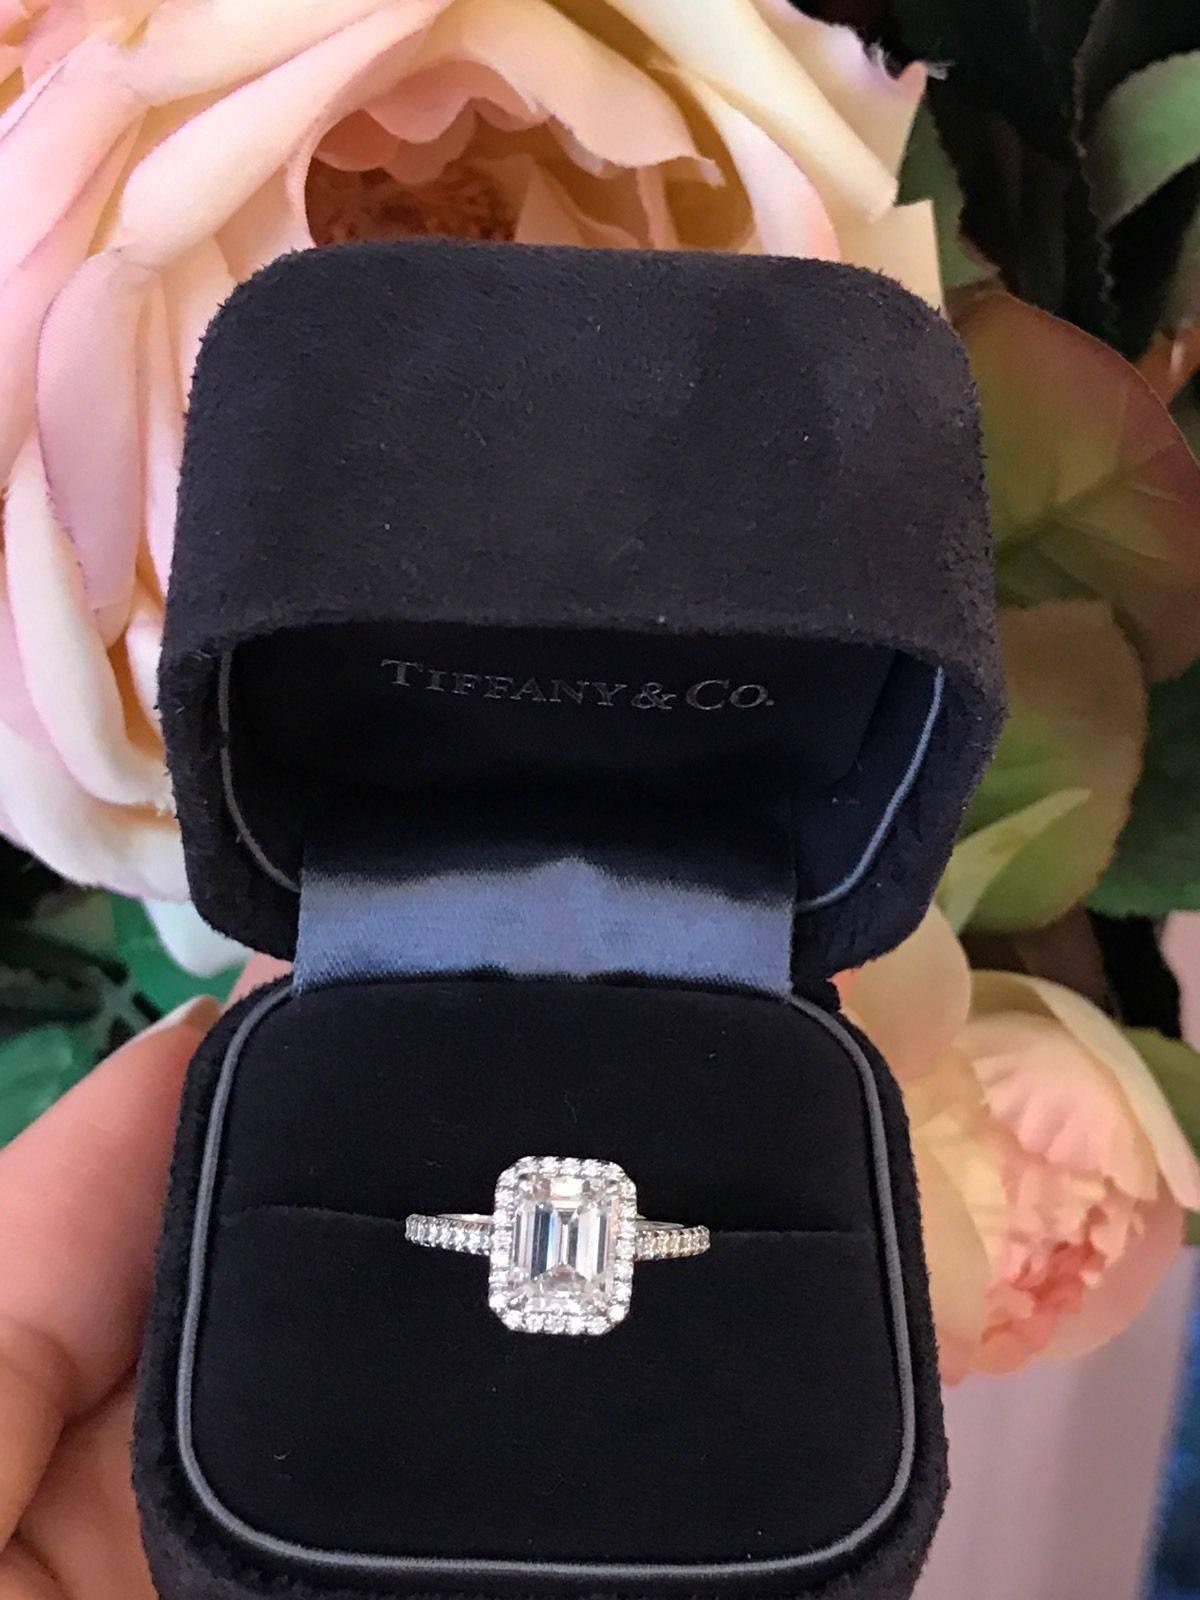 Tiffany & Co. "Soleste" diamond ring with Emerald cut diamond in the center weighing 1.64 carat, certified G color and VS1 Clarity. Made in Platinum 
Hallmark : TIFFANY & CO PT950  32916724 D1.64.
Ring weighs 3.7 grams. Ring is a